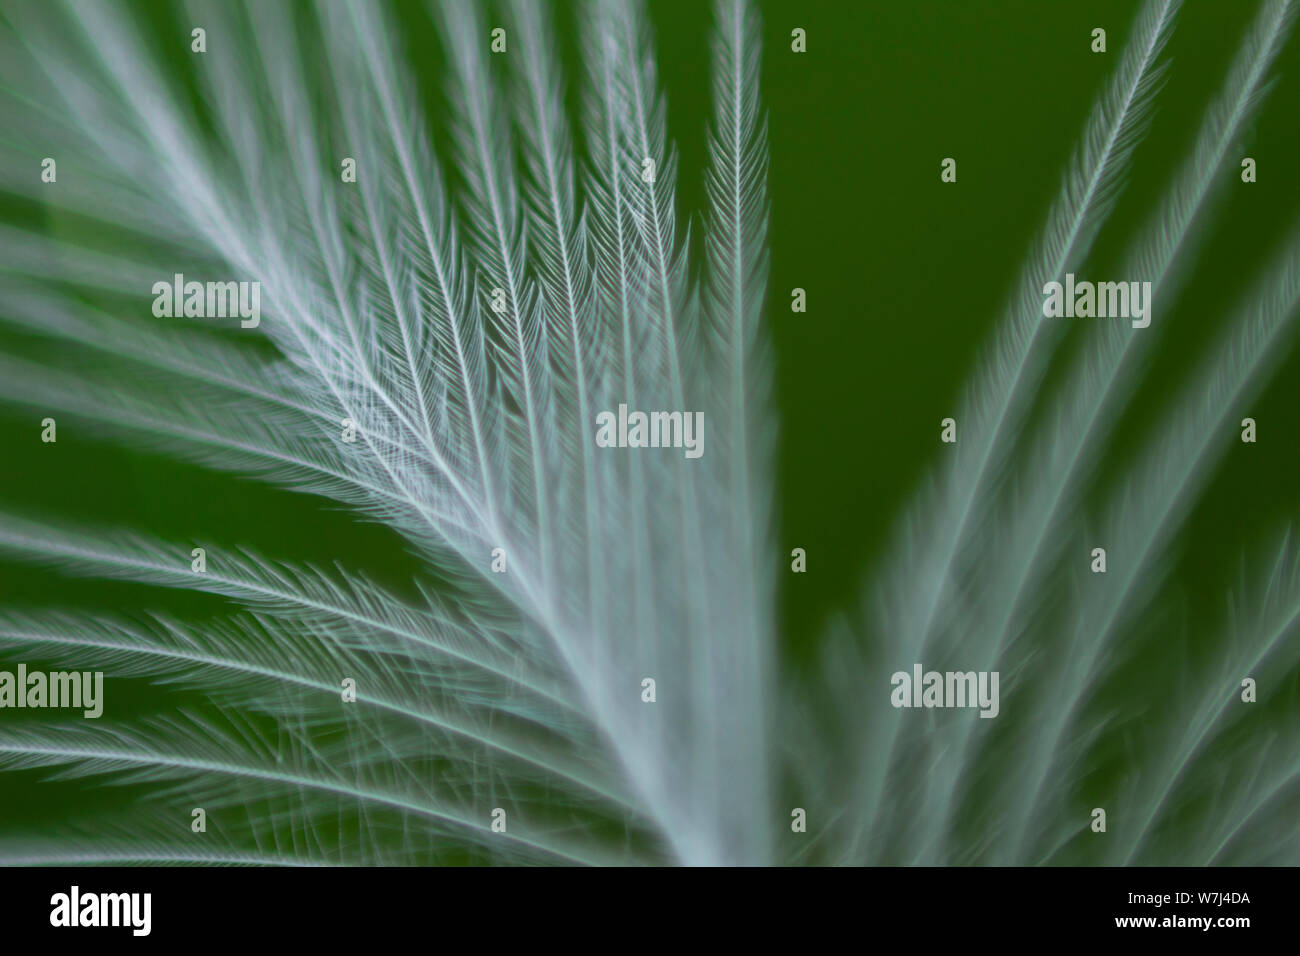 macro close-up of feather with blurry green grass in the background Stock Photo